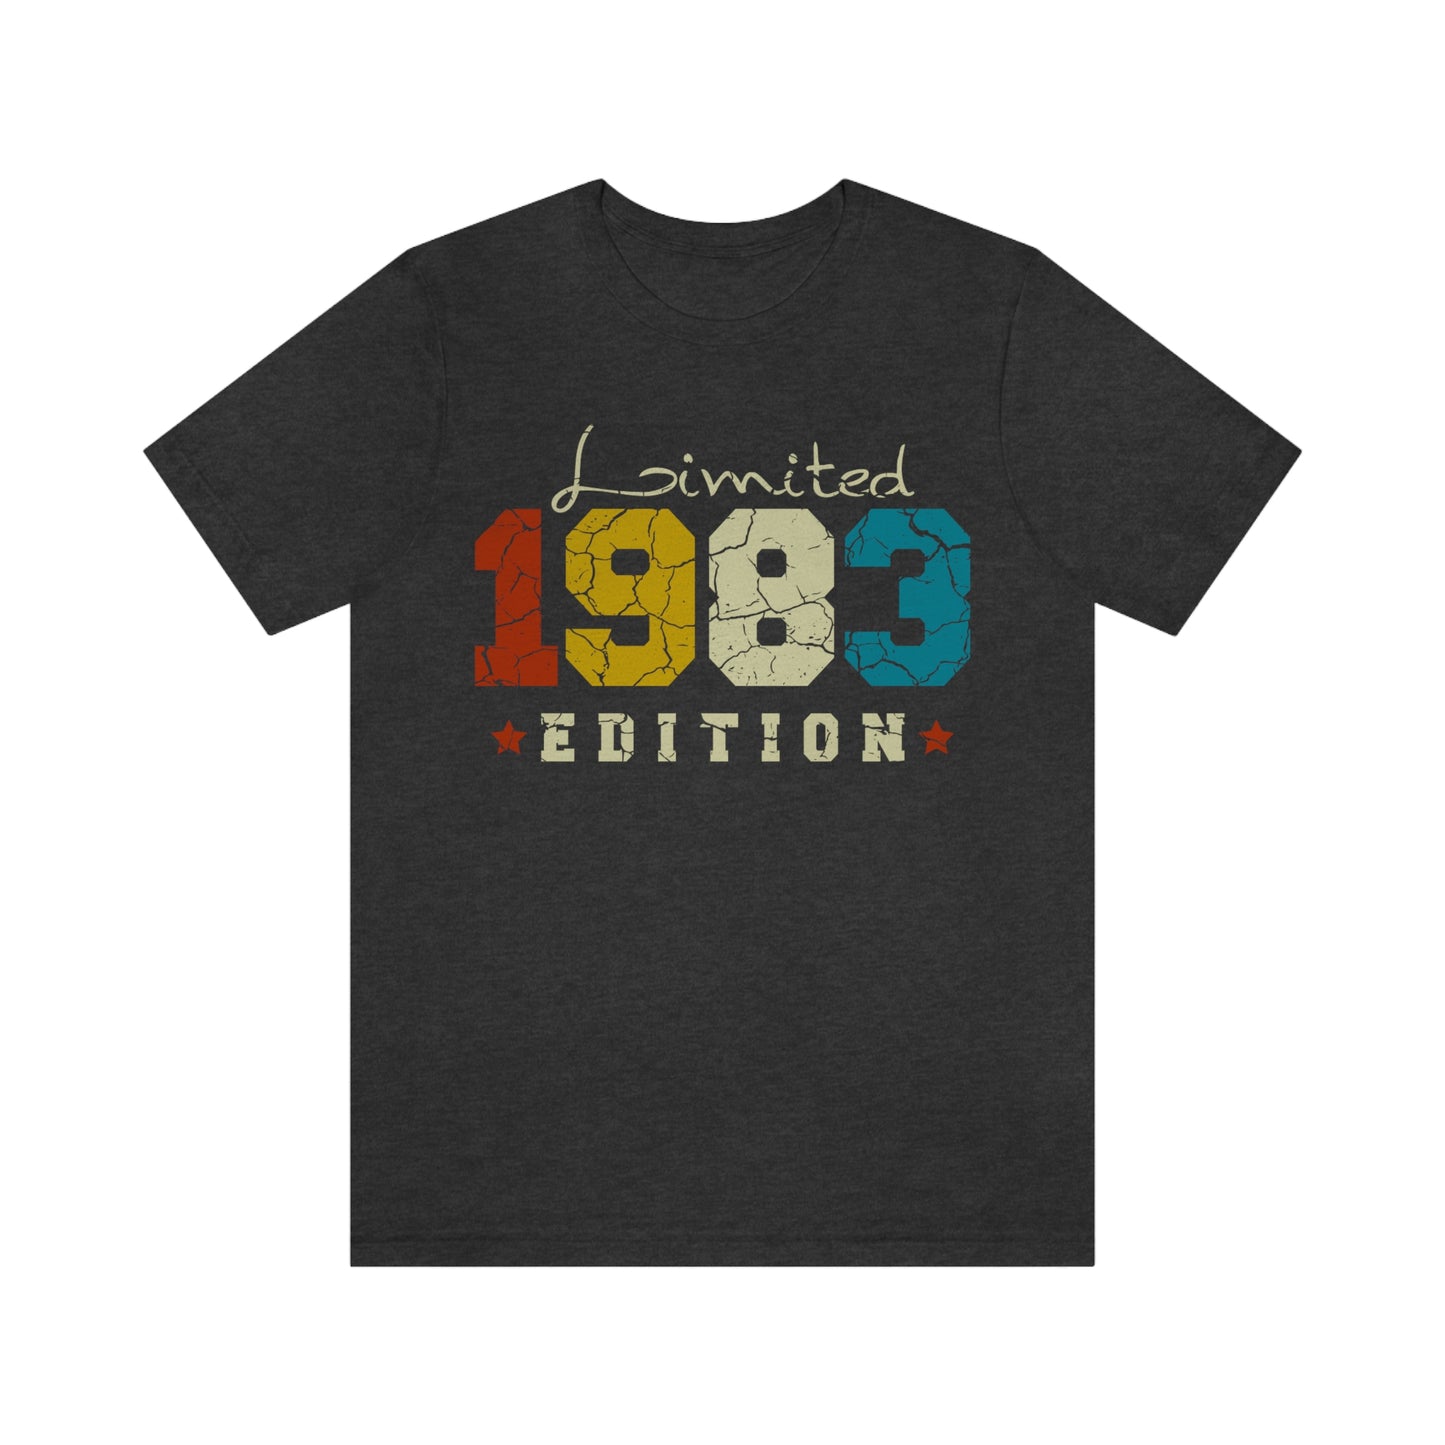 40th birthday gifts for women or men, Limited 1983 Edition Shirt for wife or husband - 37 Design Unit